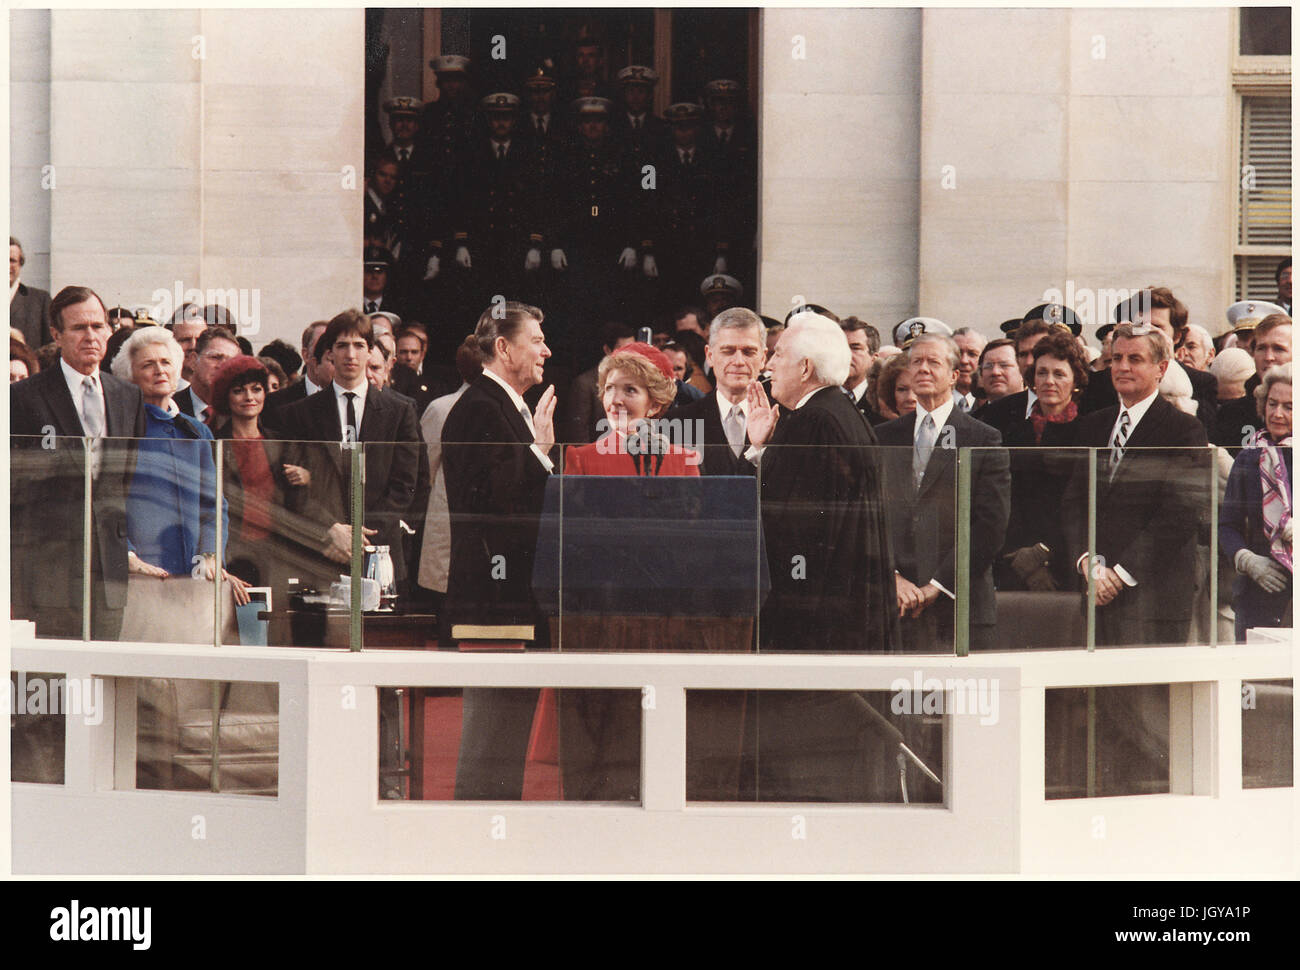 Ronald Reagan being sworn as President of the United States at the U.S. Capitol on January 20, 1981. Stock Photo